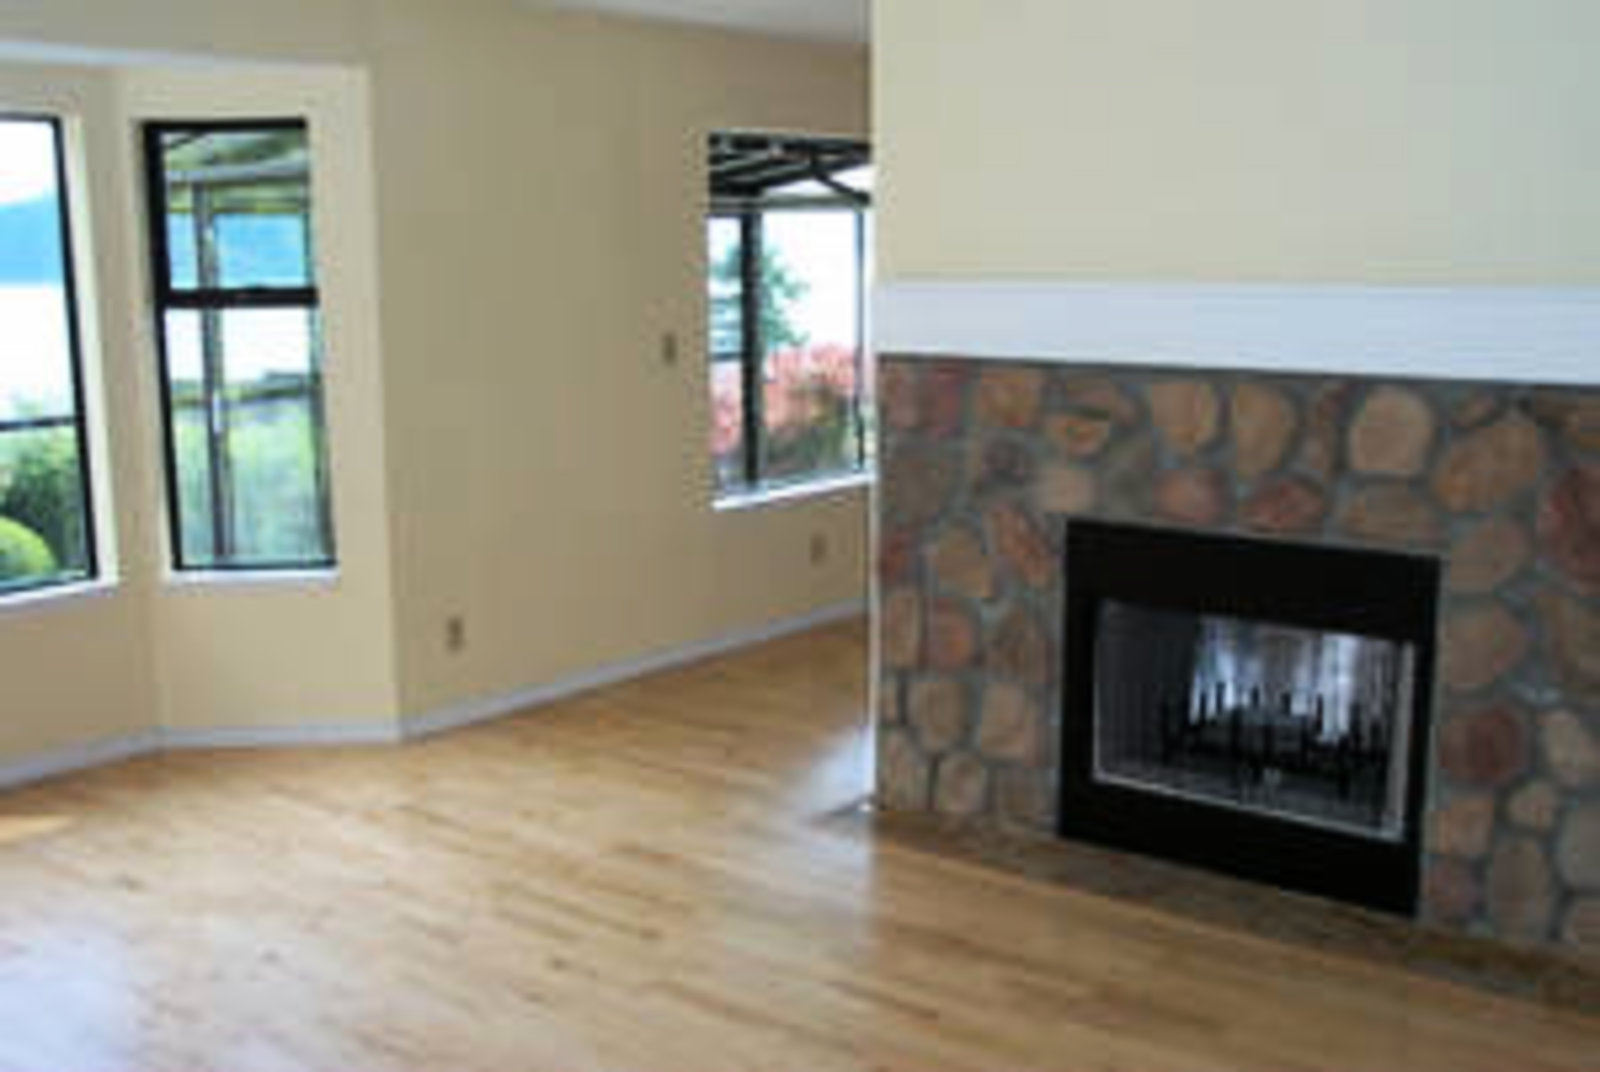 Living Room Birchwood floors with wood burning fireplace and ocean view.